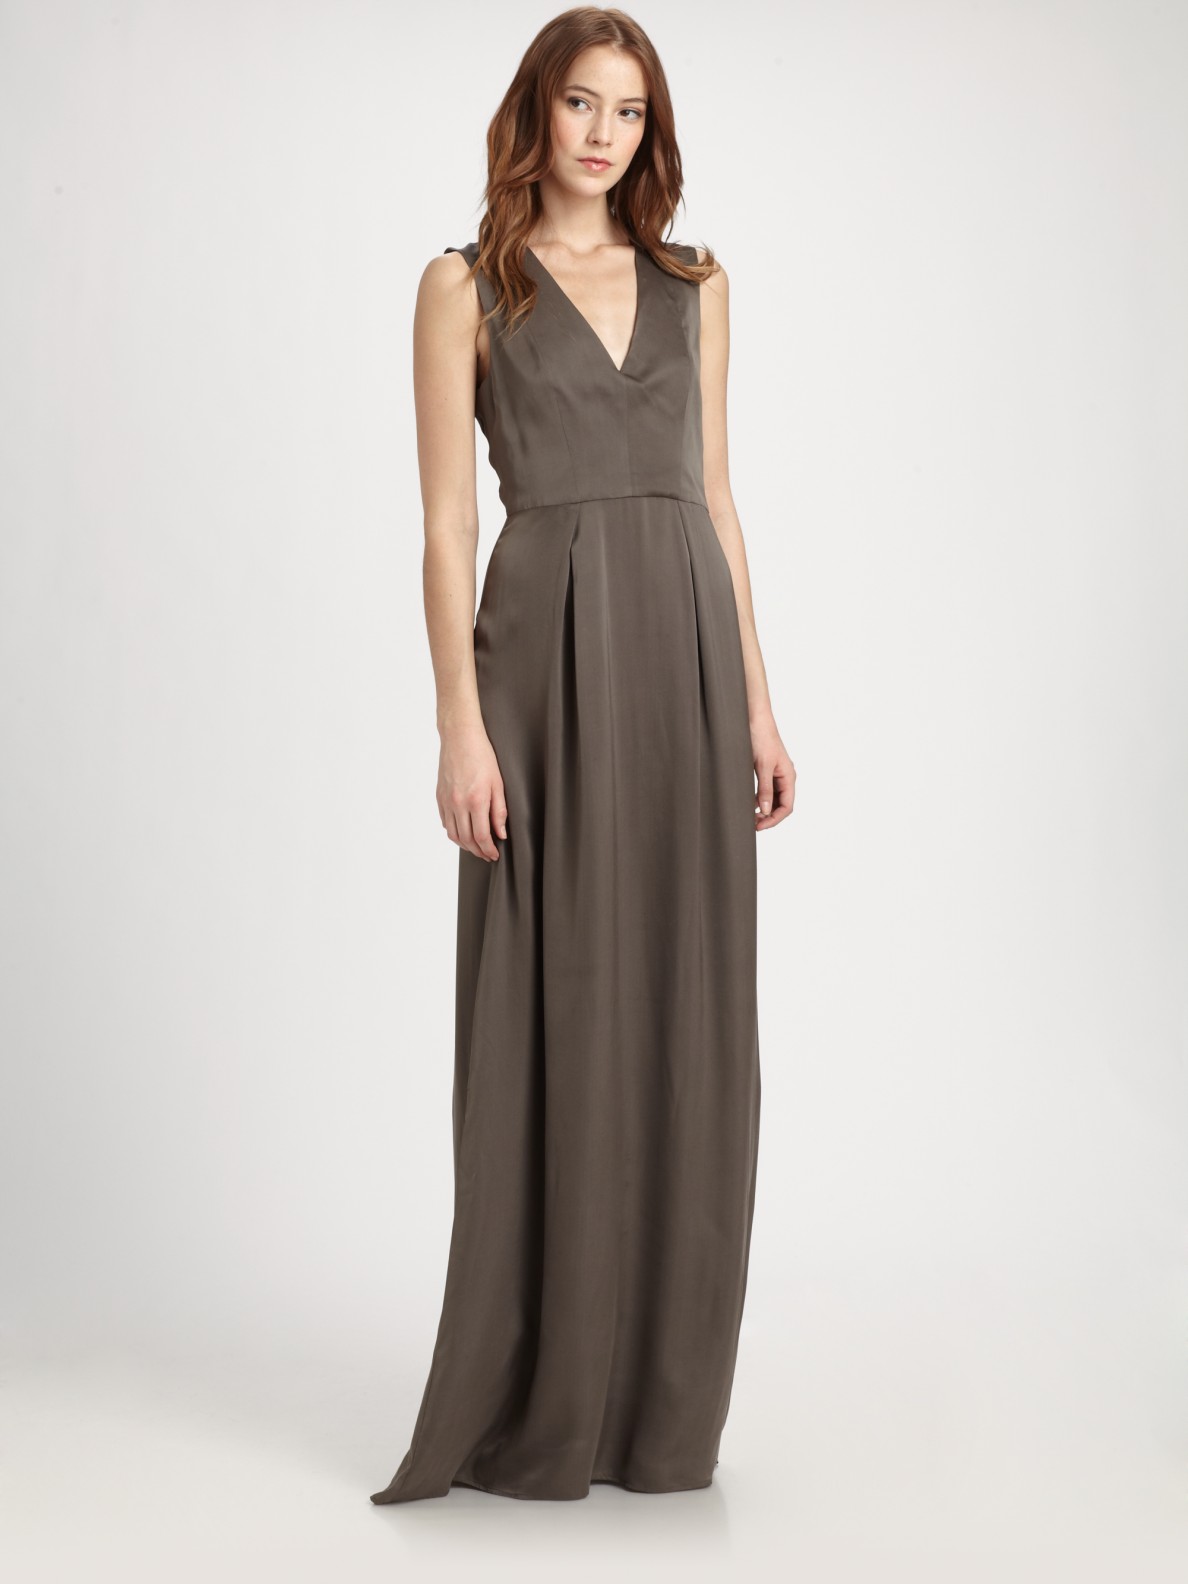 Theory Silk Maxi Dress in Taupe (Brown) - Lyst